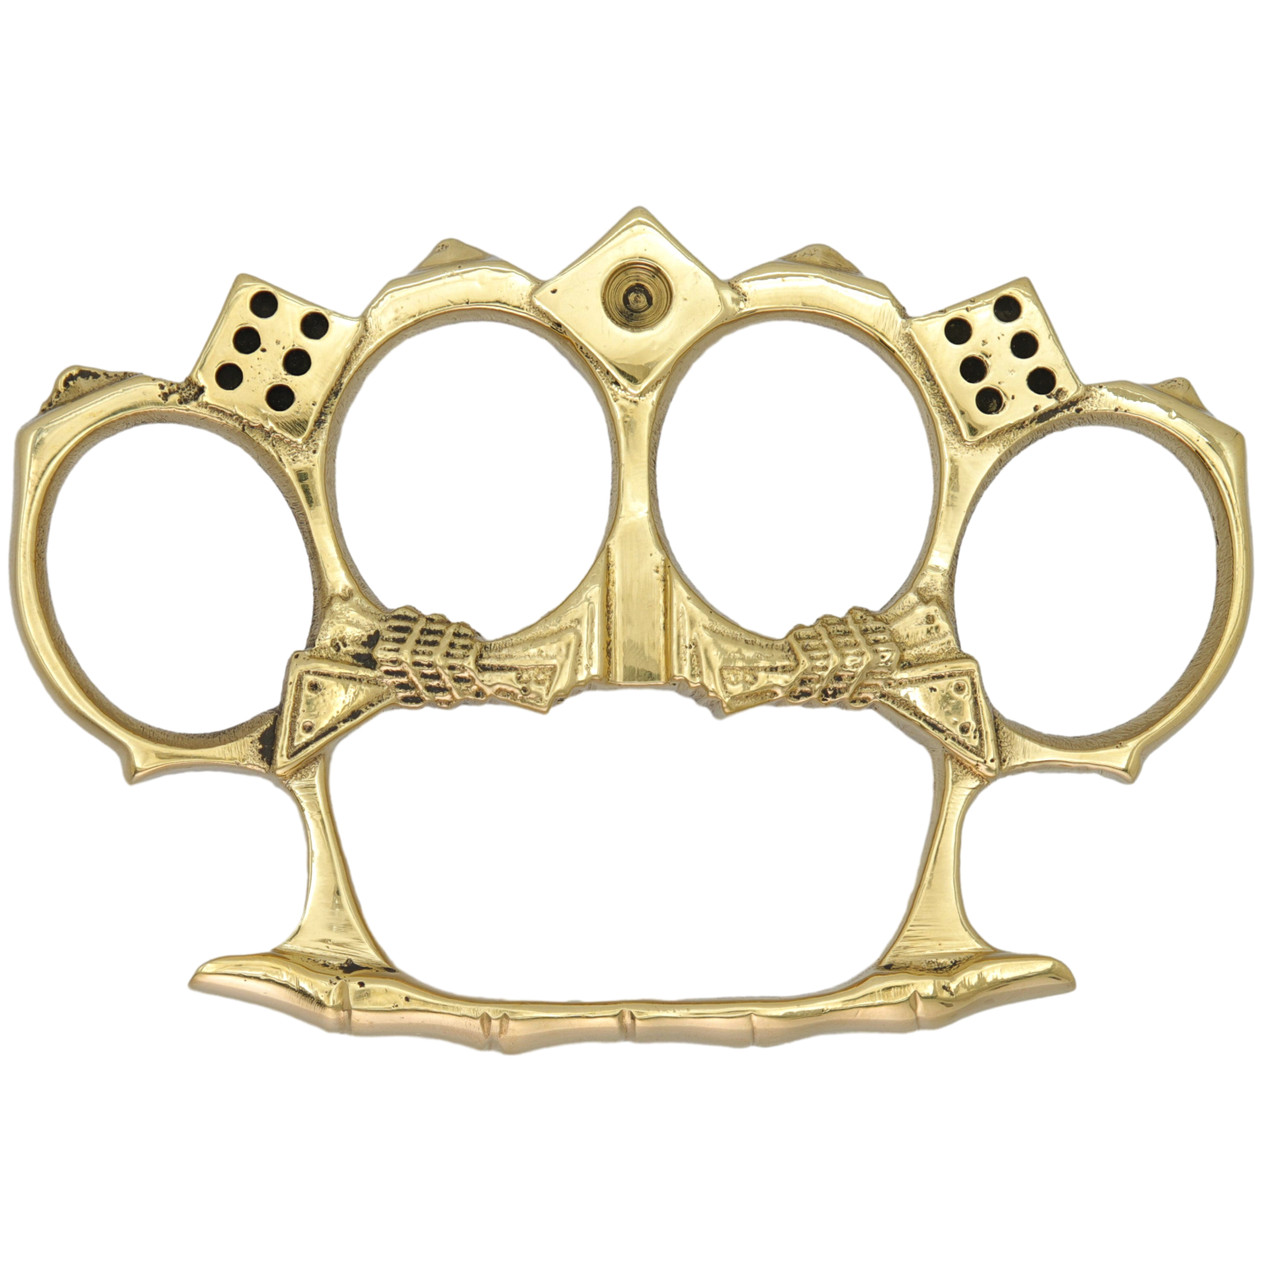 It's now legal to carry brass knuckles in Texas. Because, 'self-defense